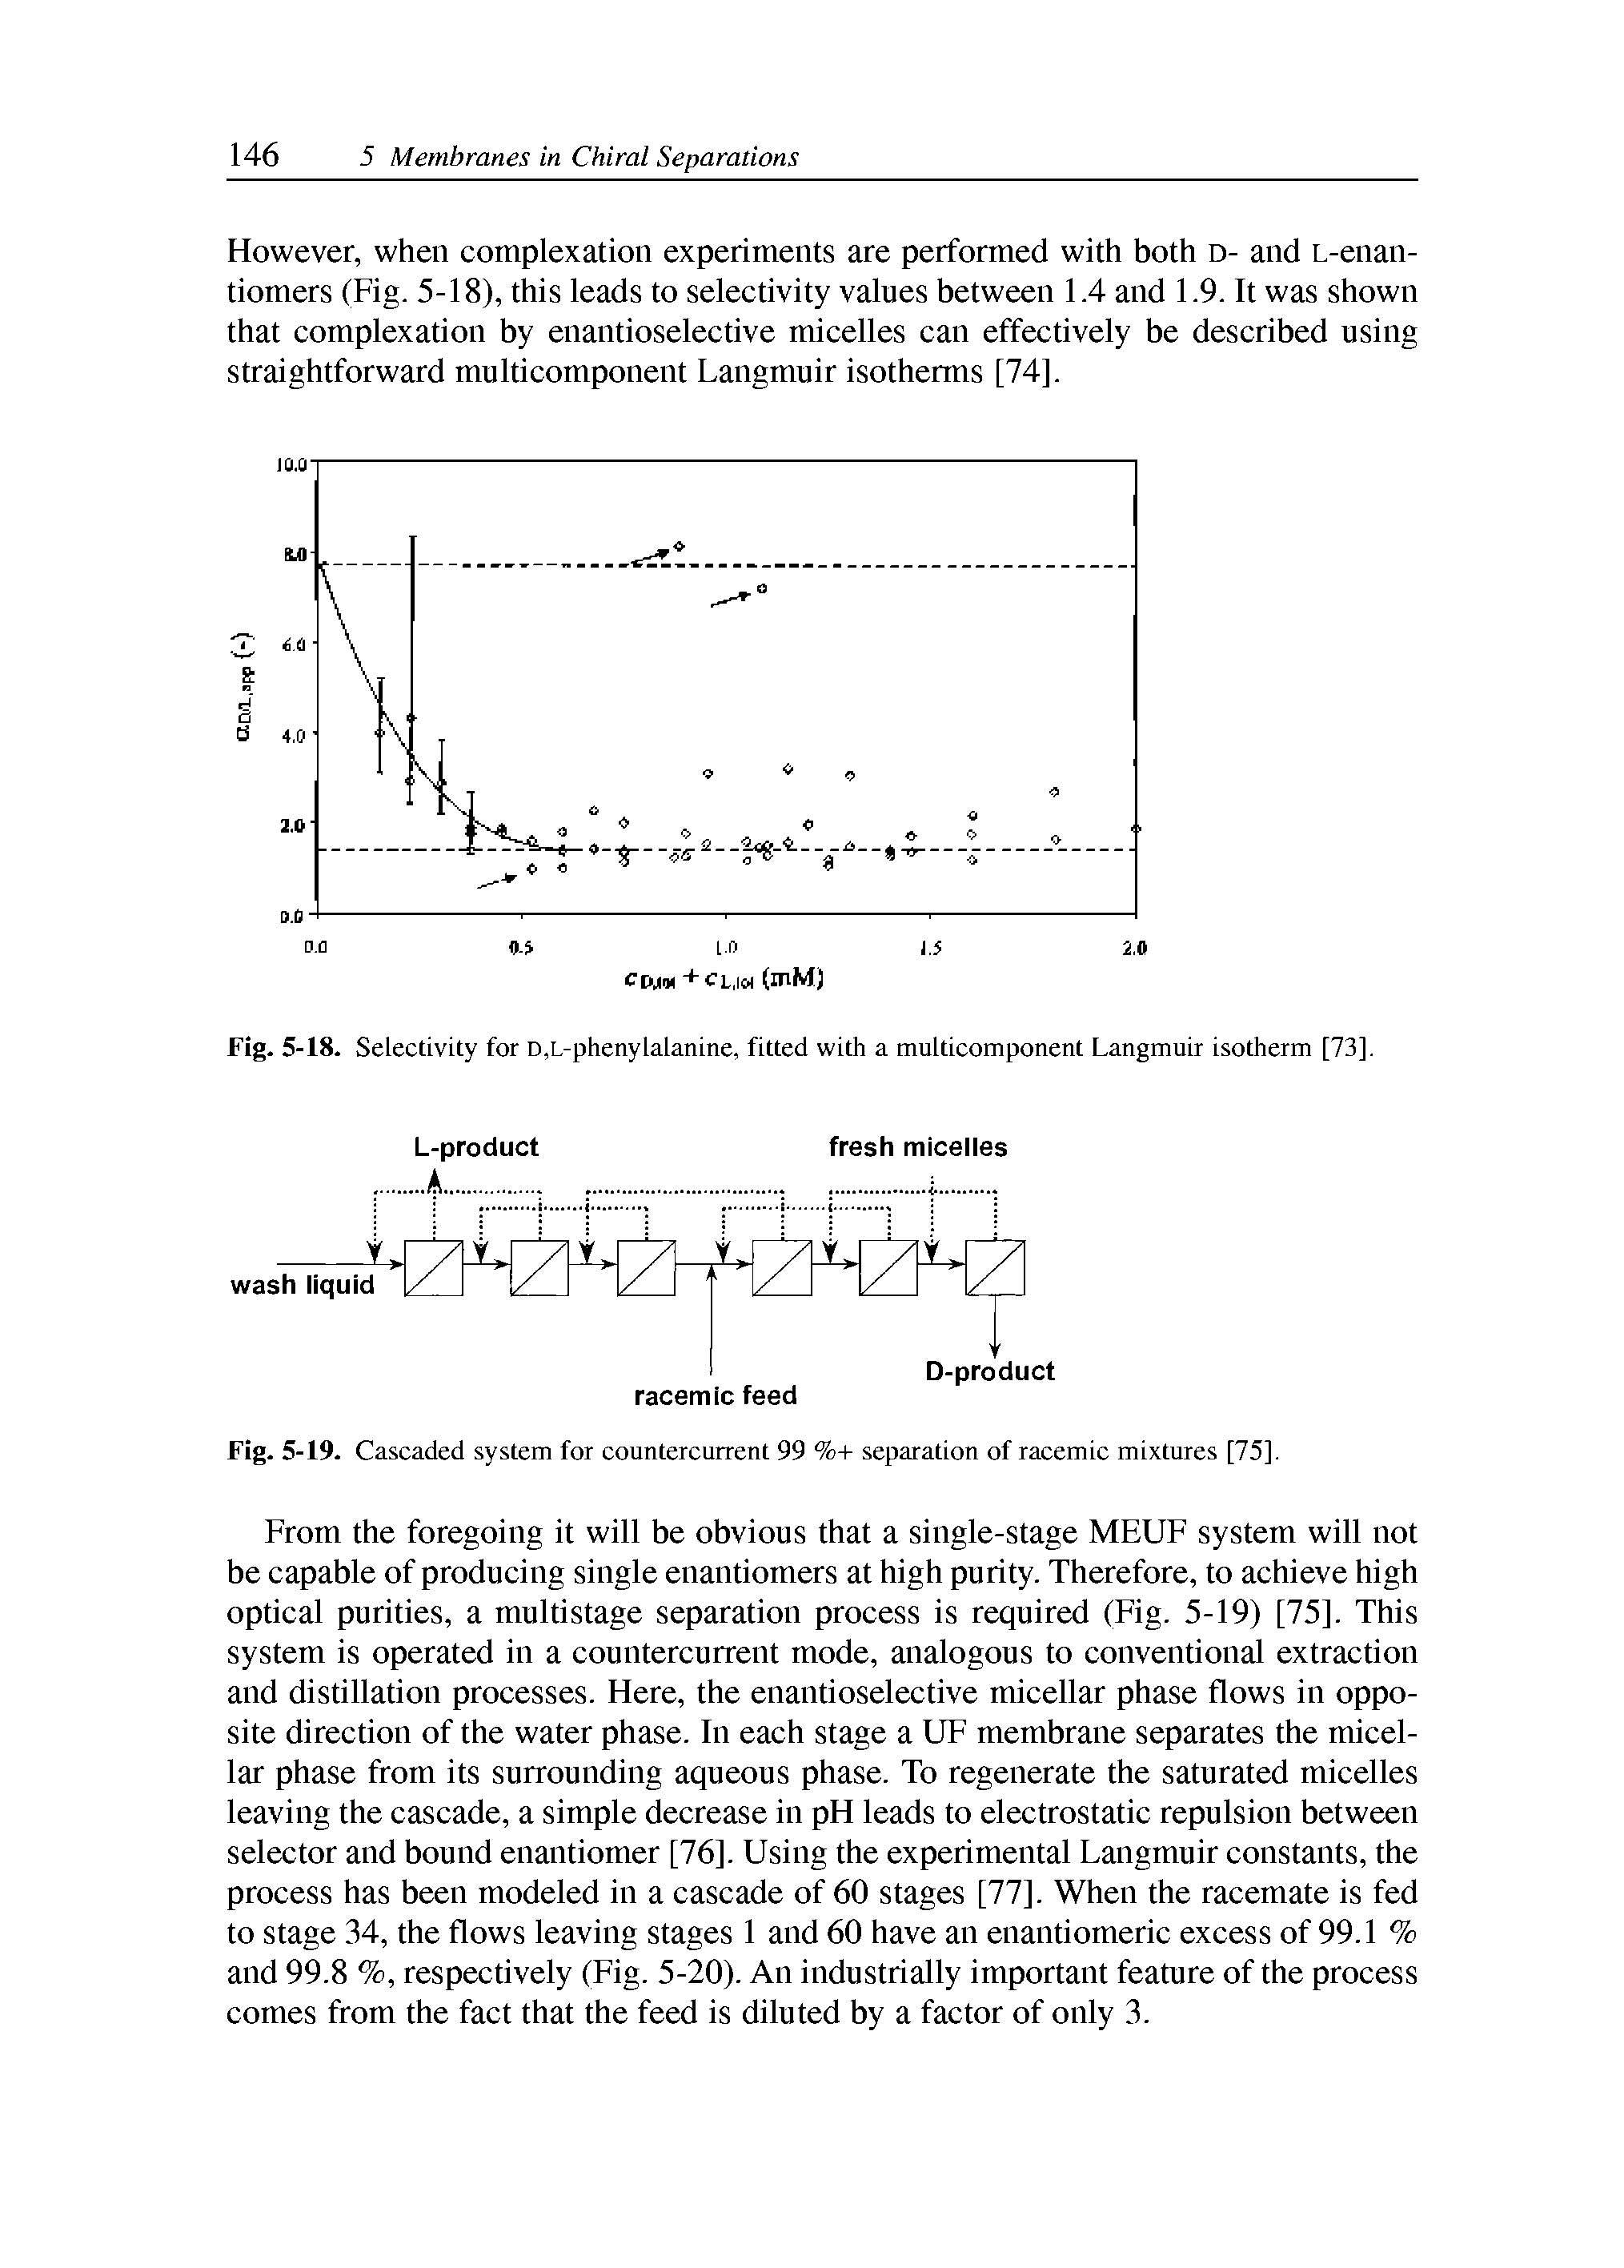 Fig. 5-18. Selectivity for D,L-phenylalanine, fitted with a multicomponent Langmuir isotherm [73],...